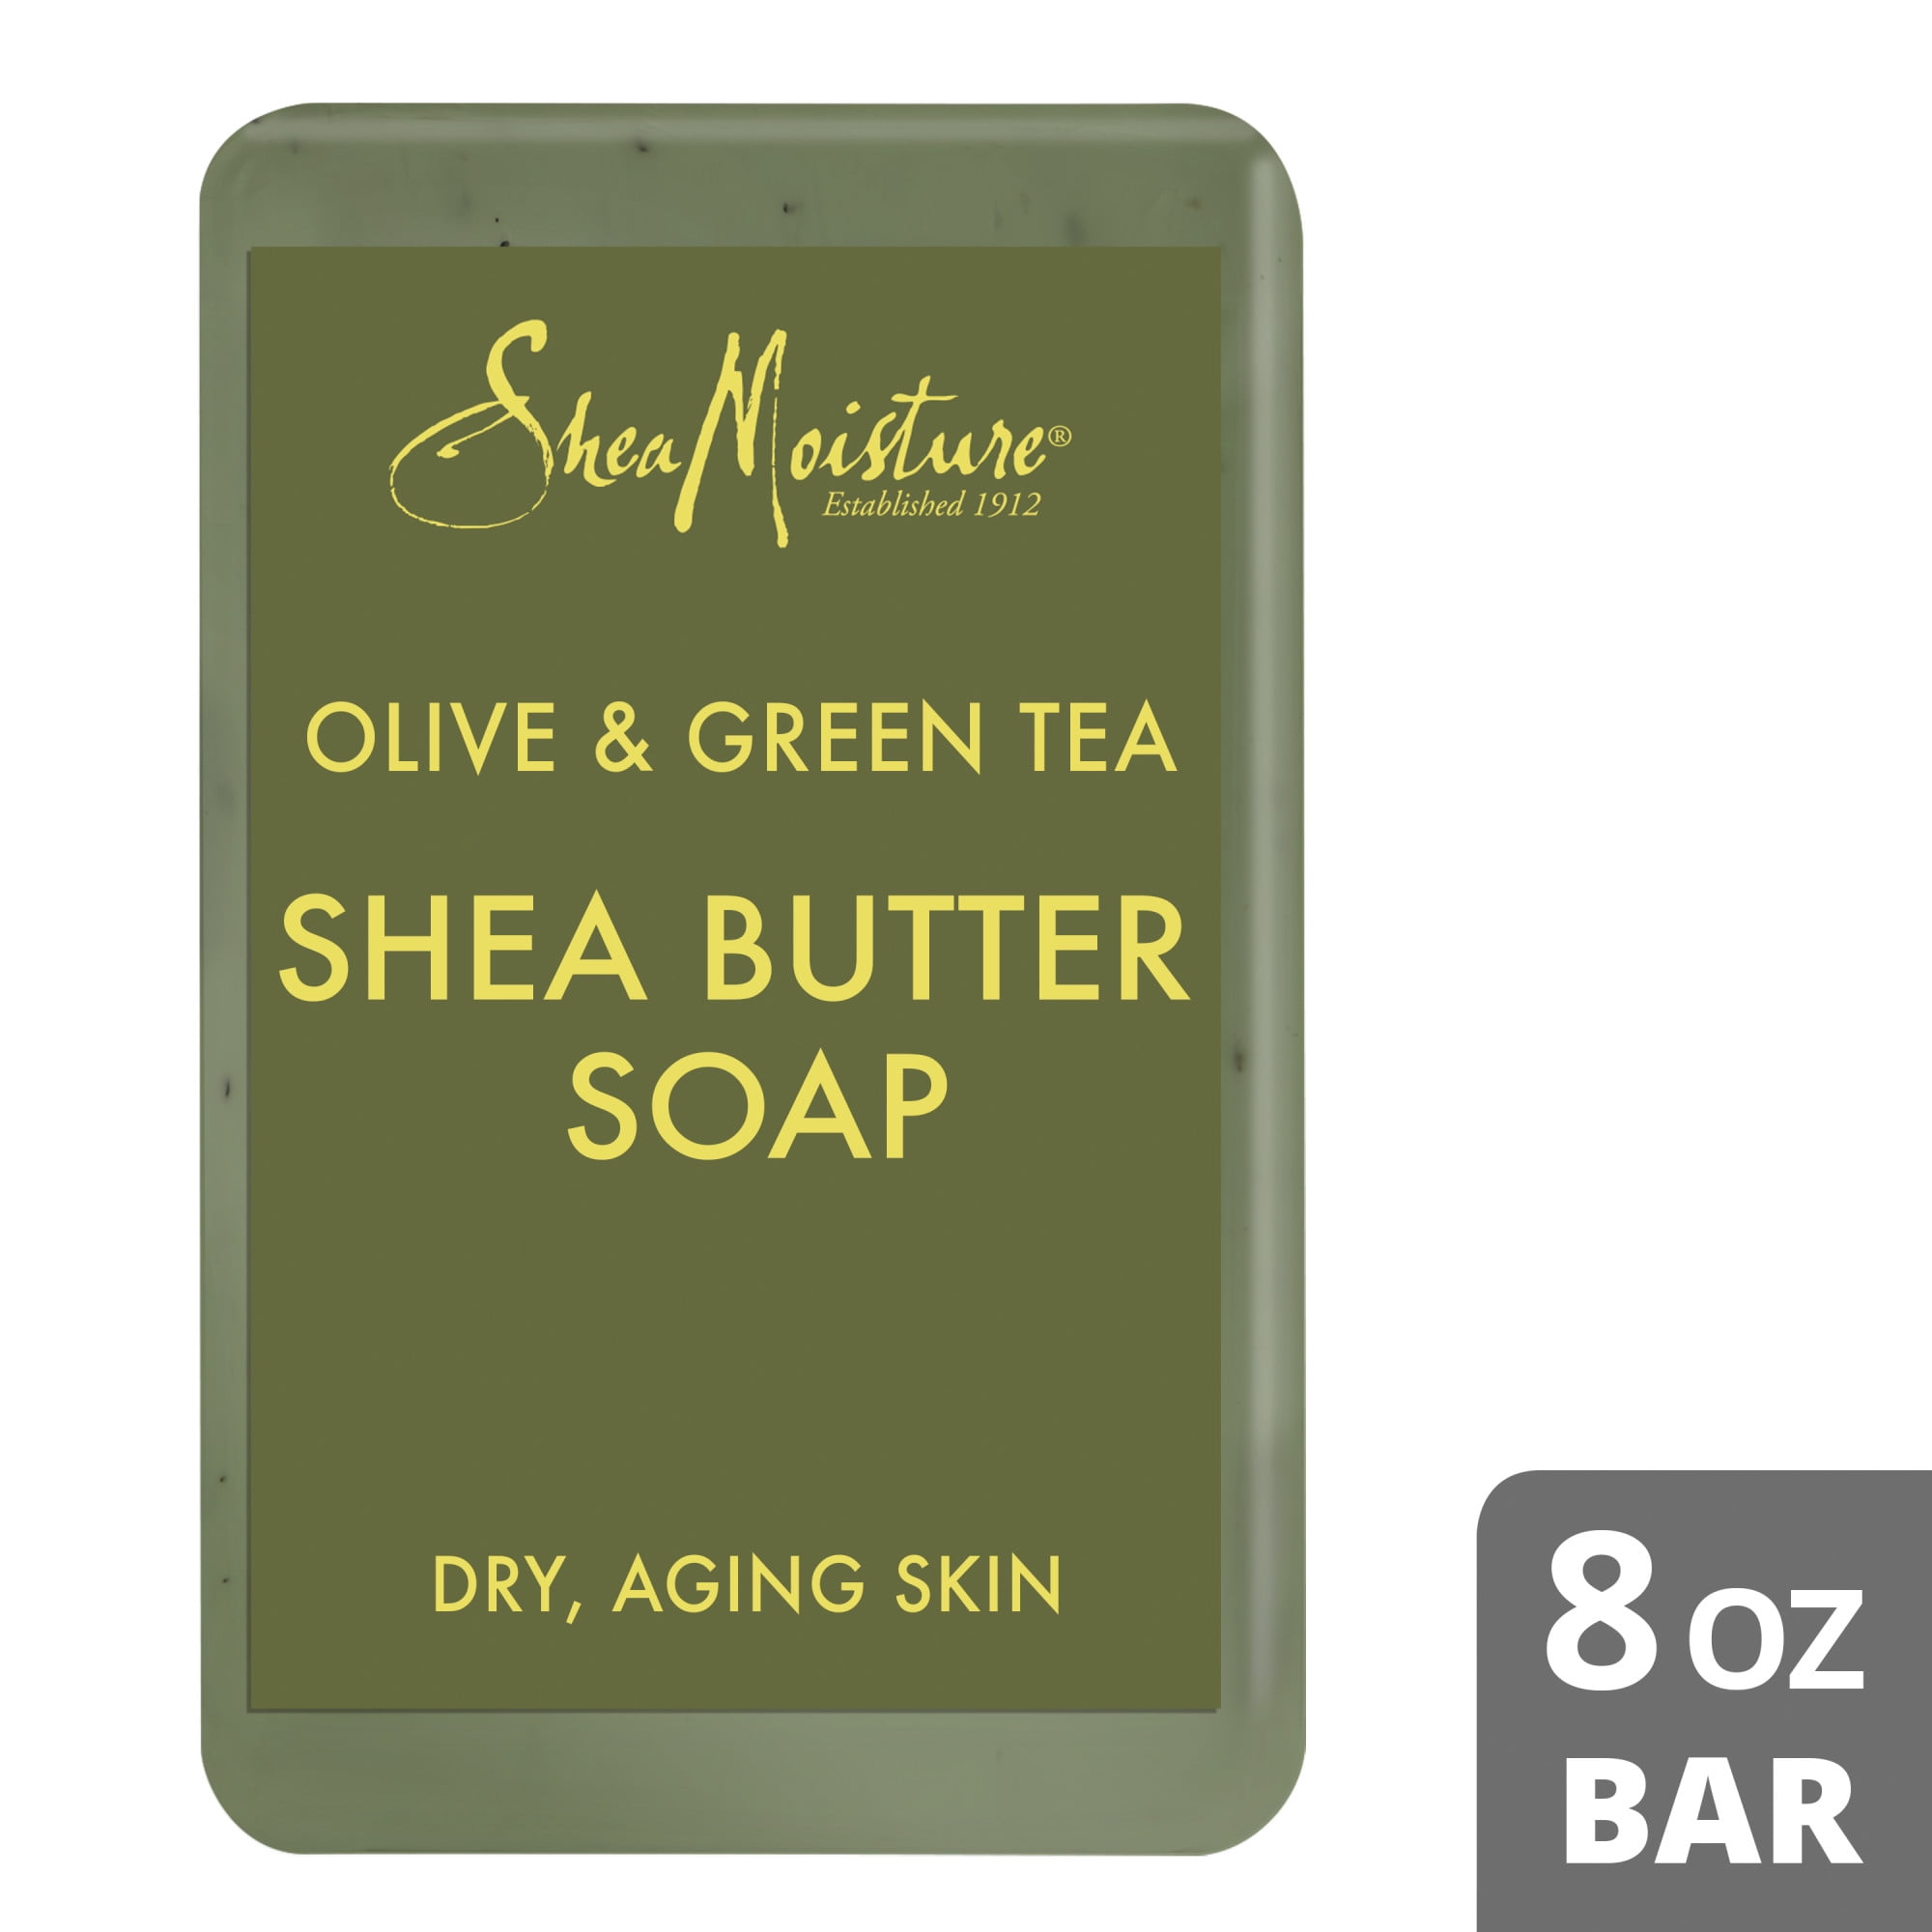 SheaMoisture Shea Butter Soap Olive Oil And Green Tea Extract, 8 Oz.